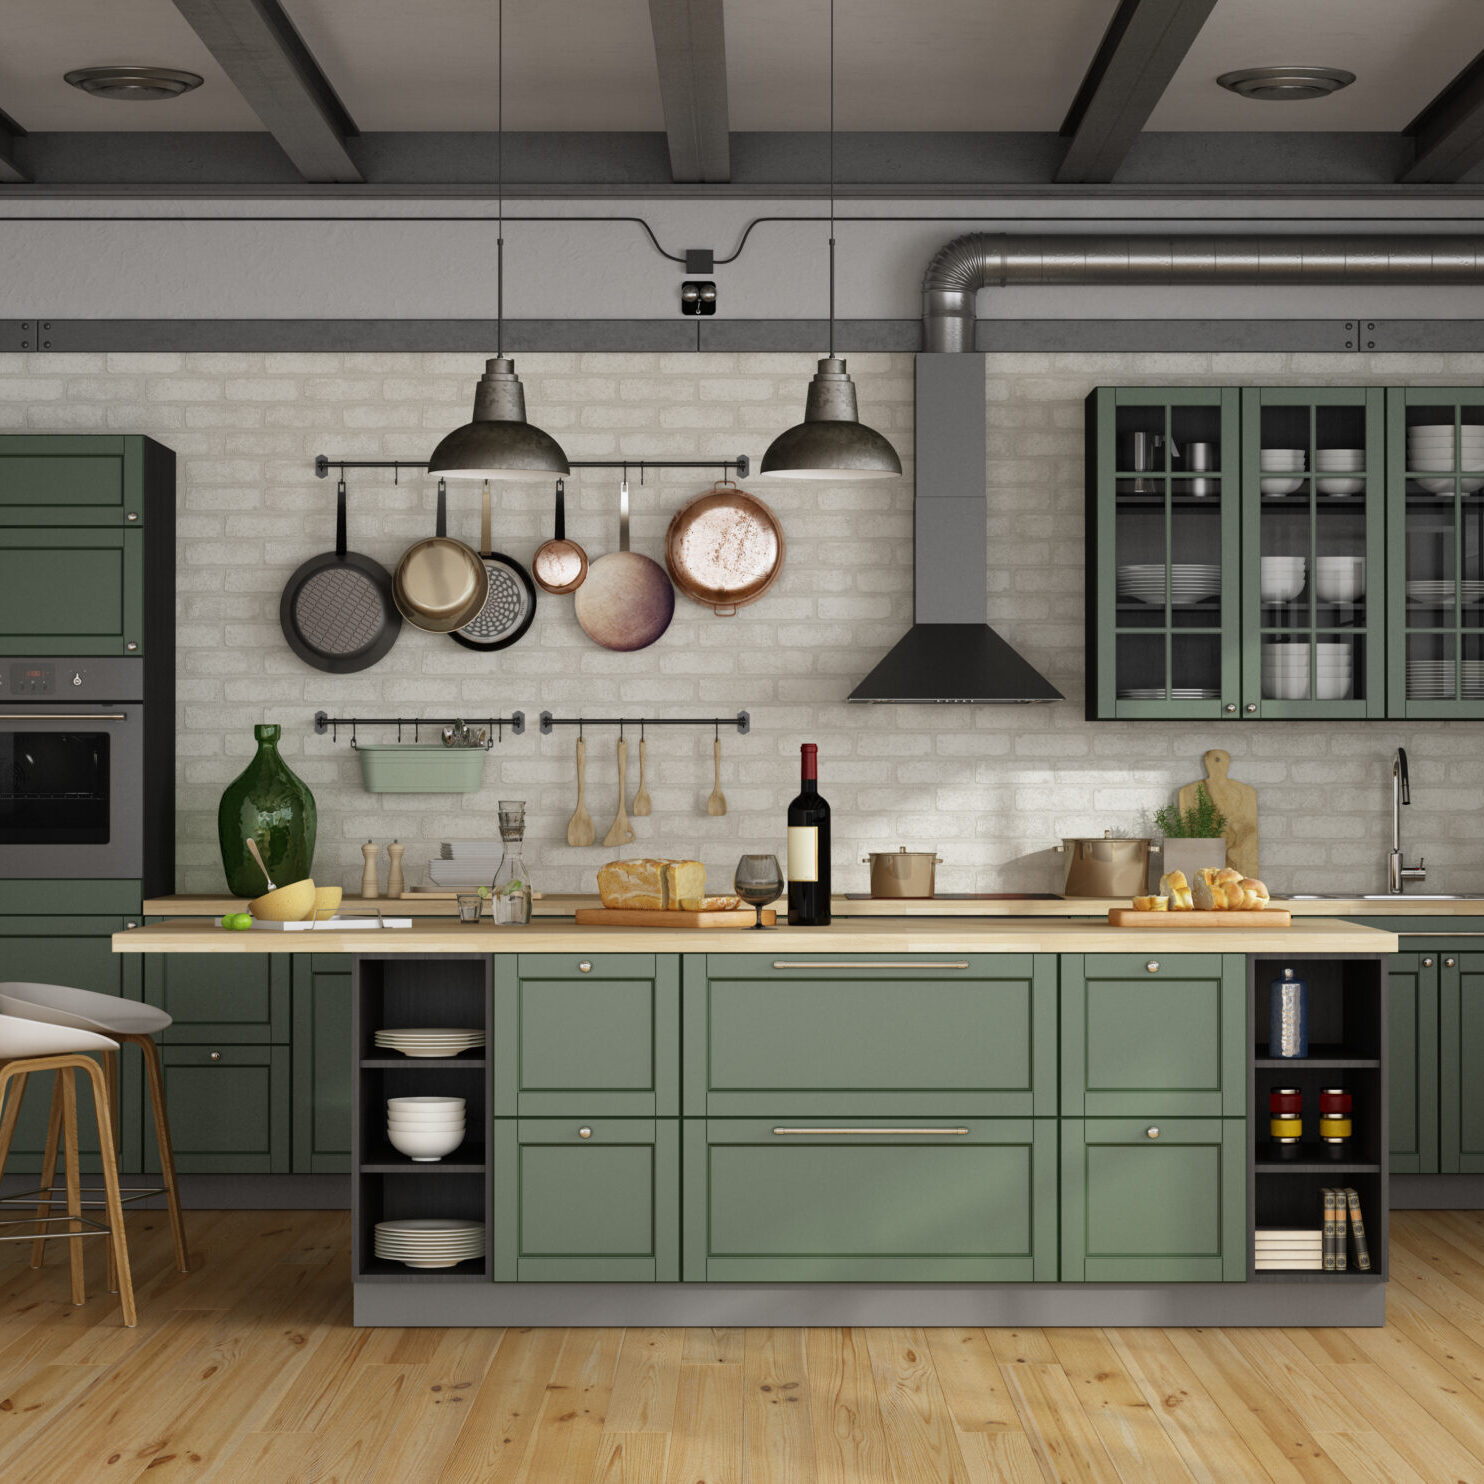 Vintage green kitchen with island in a loft - 3d rendering